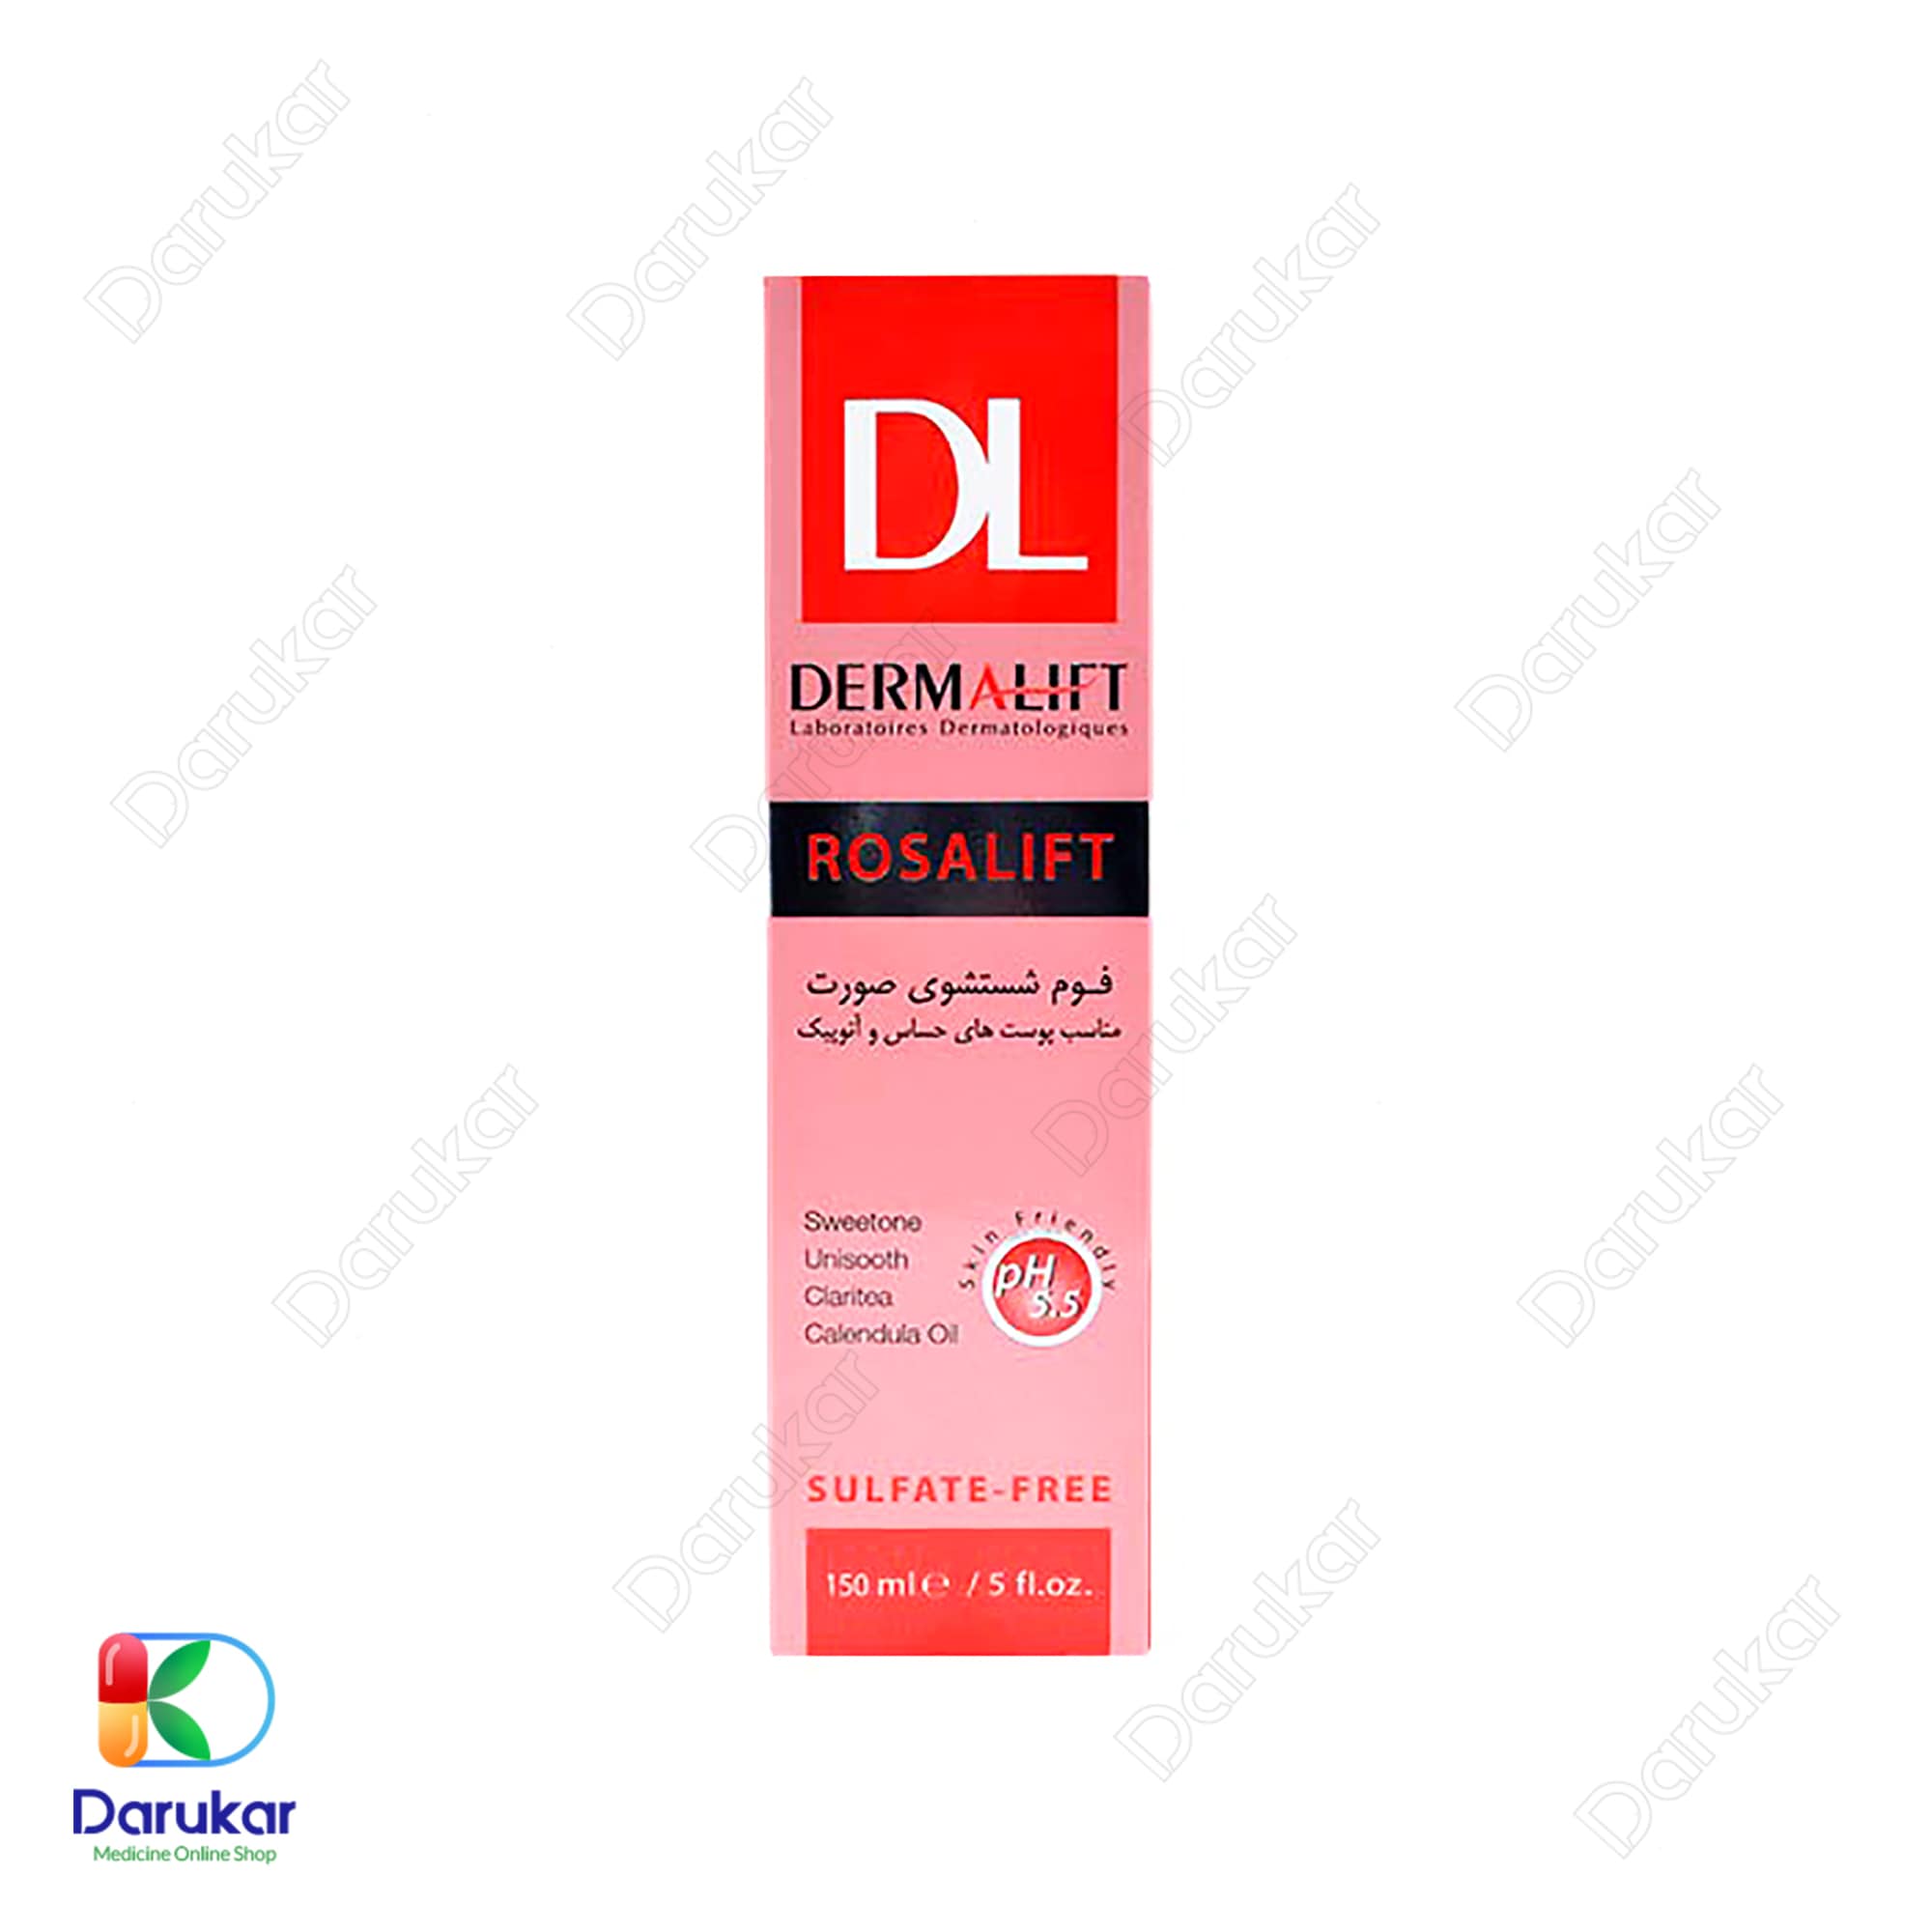 Dermalift Rosalift Cleaning Syndet Foam for Sensitive and Atopic Skin 1